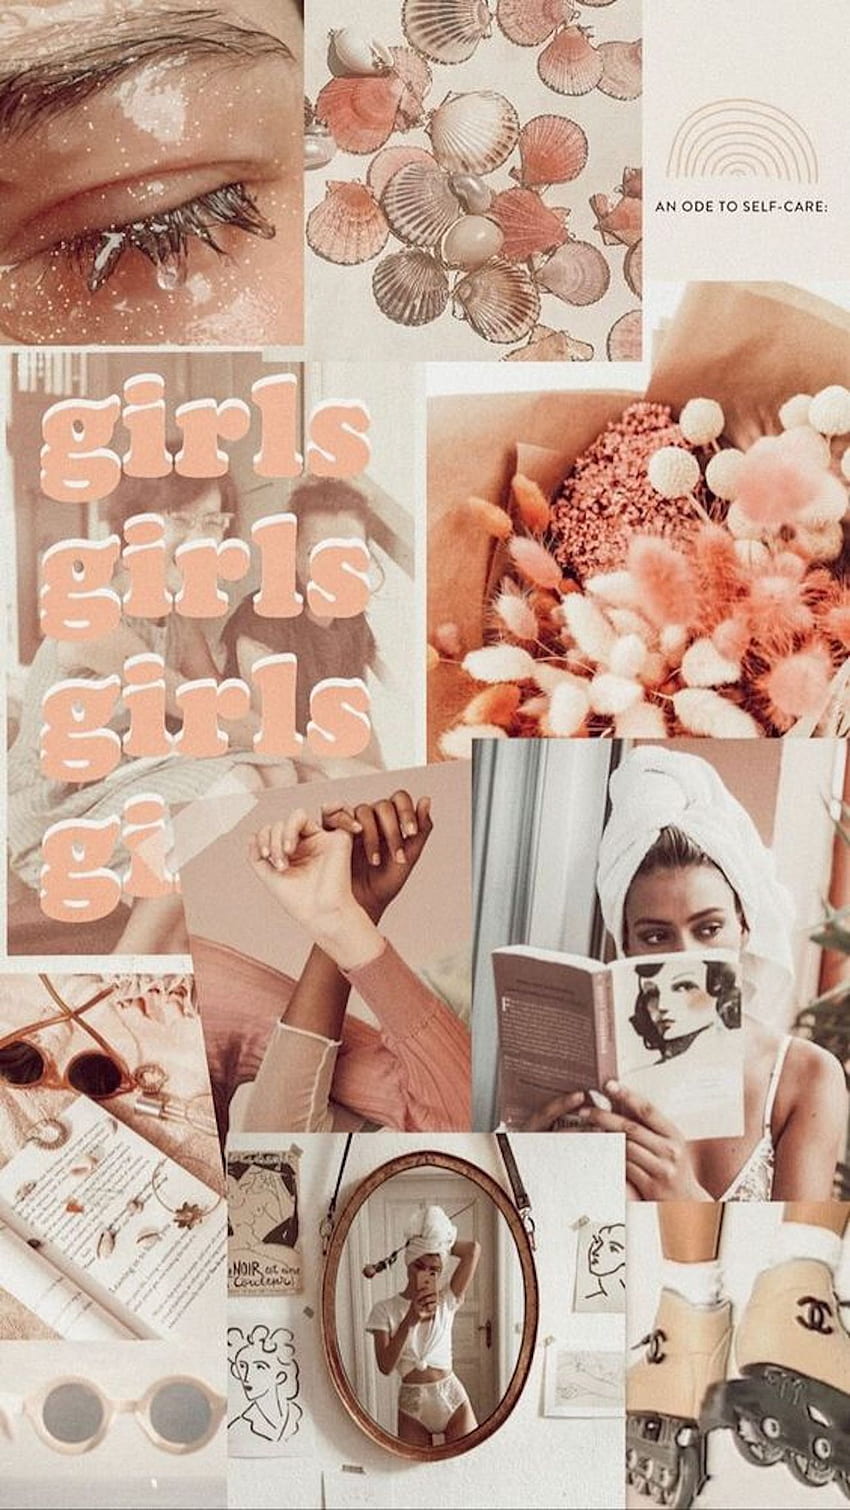 A collage of images of a woman and self care items in a peach color scheme. - Collage